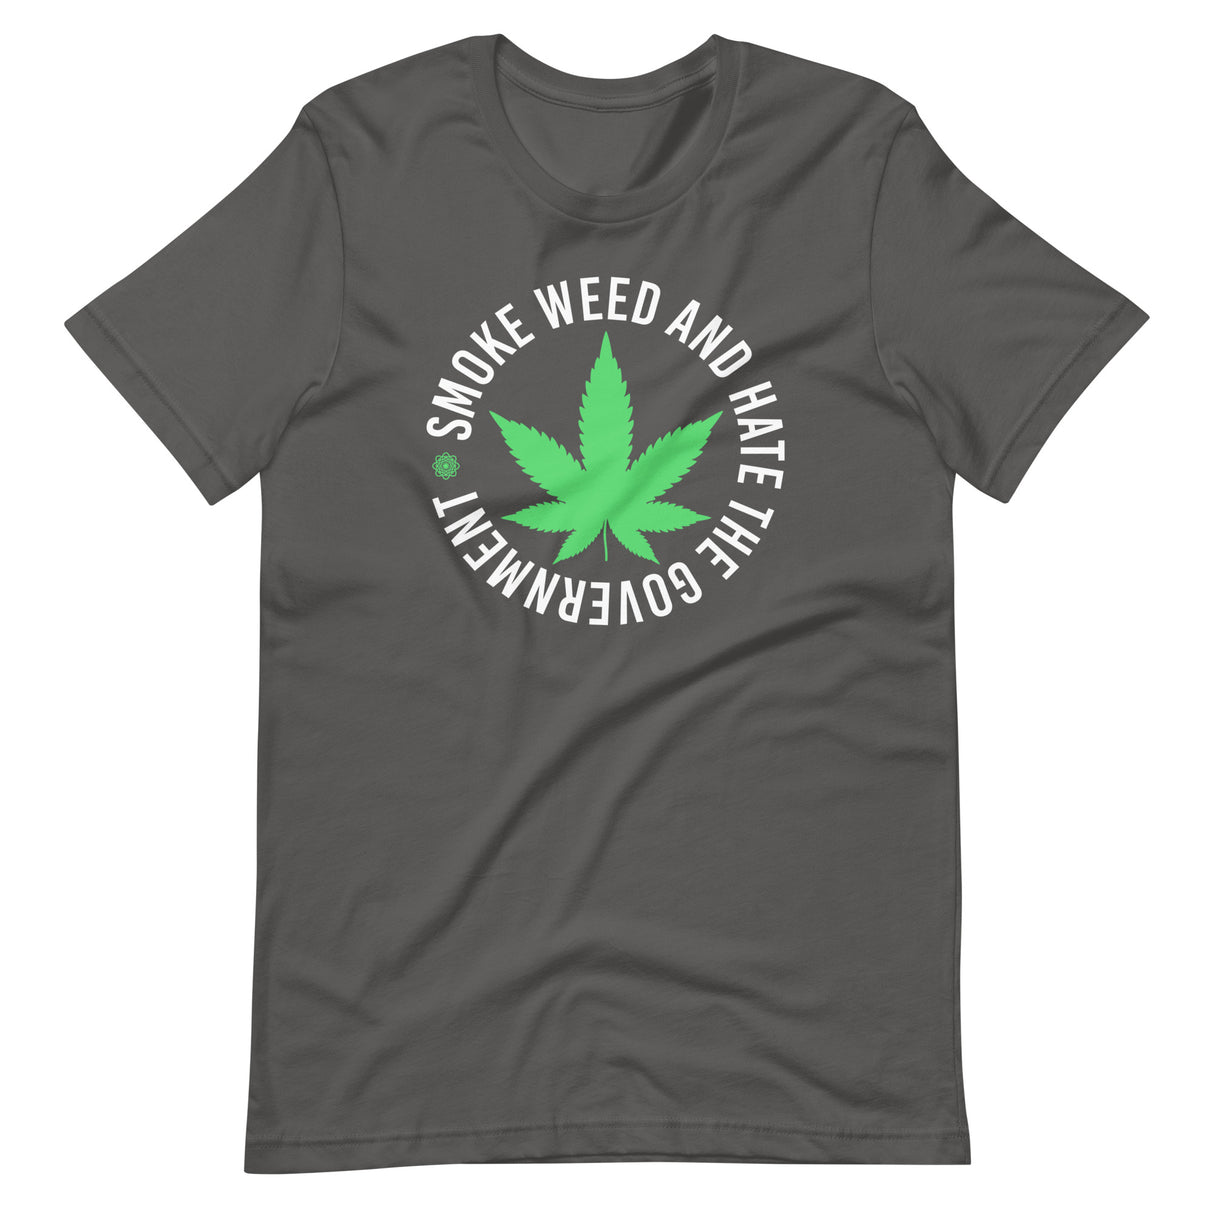 Smoke Weed and Hate The Government Shirt - Libertarian Country